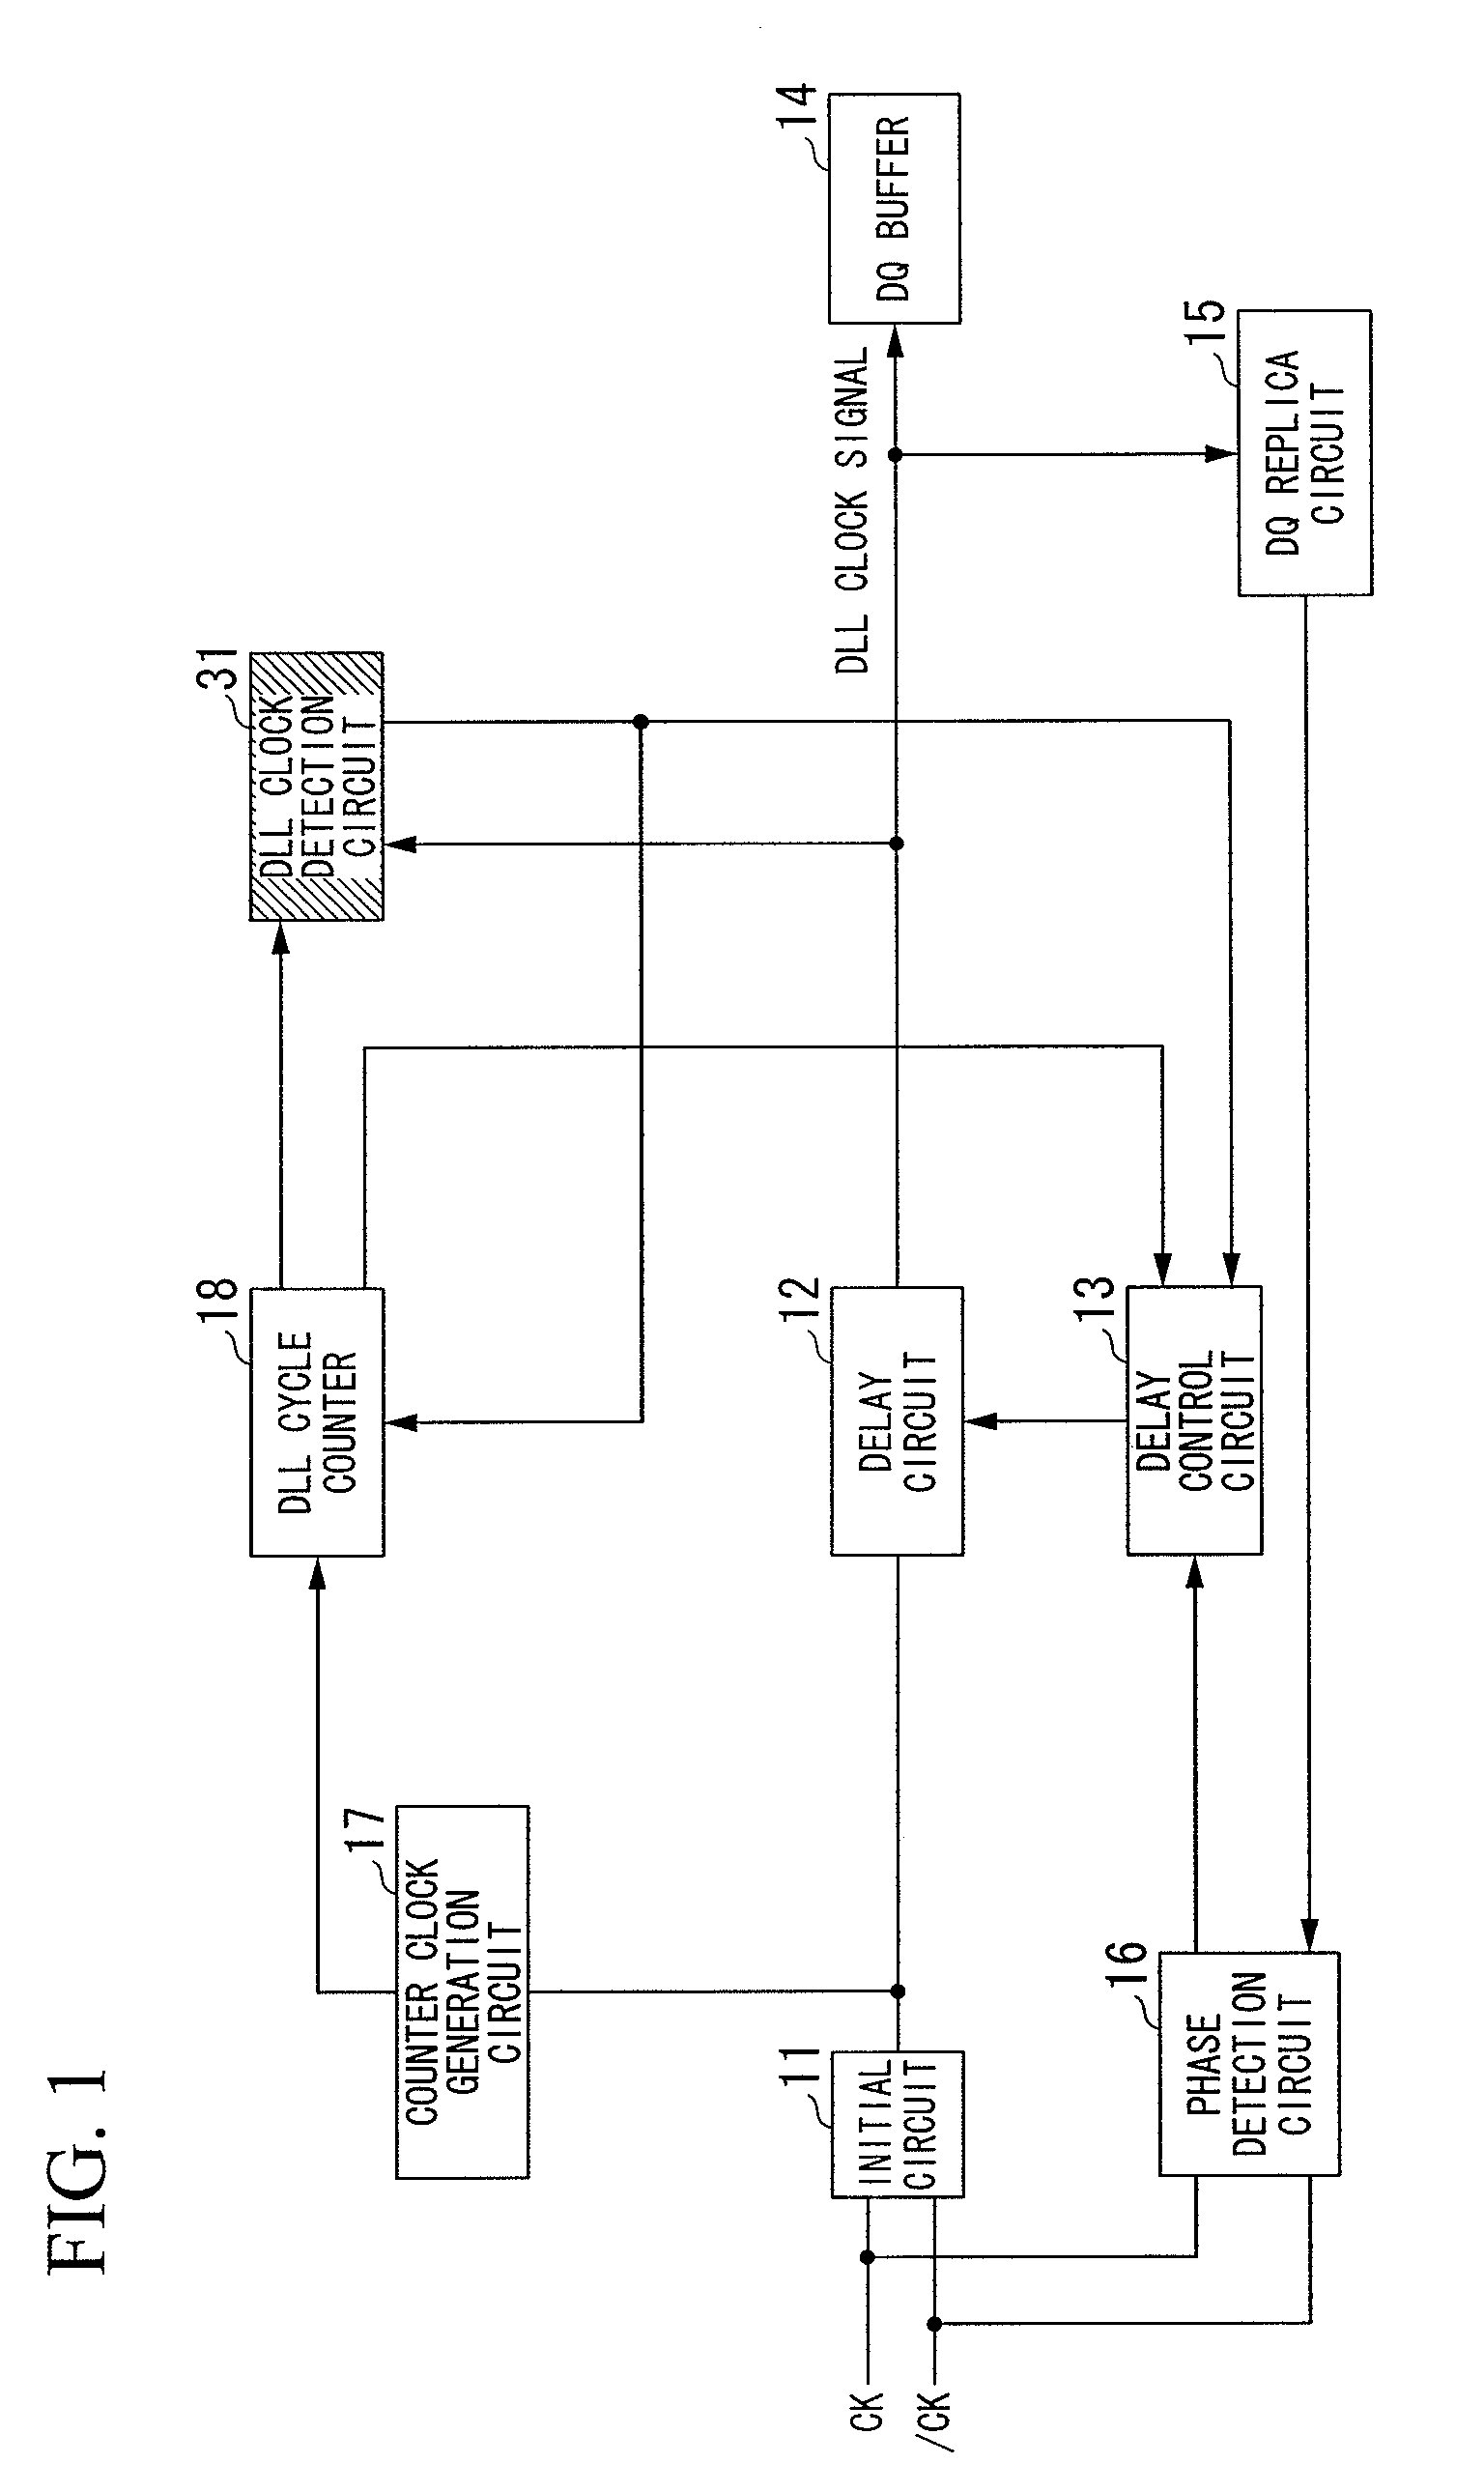 Dll circuit adapted to semiconductor device